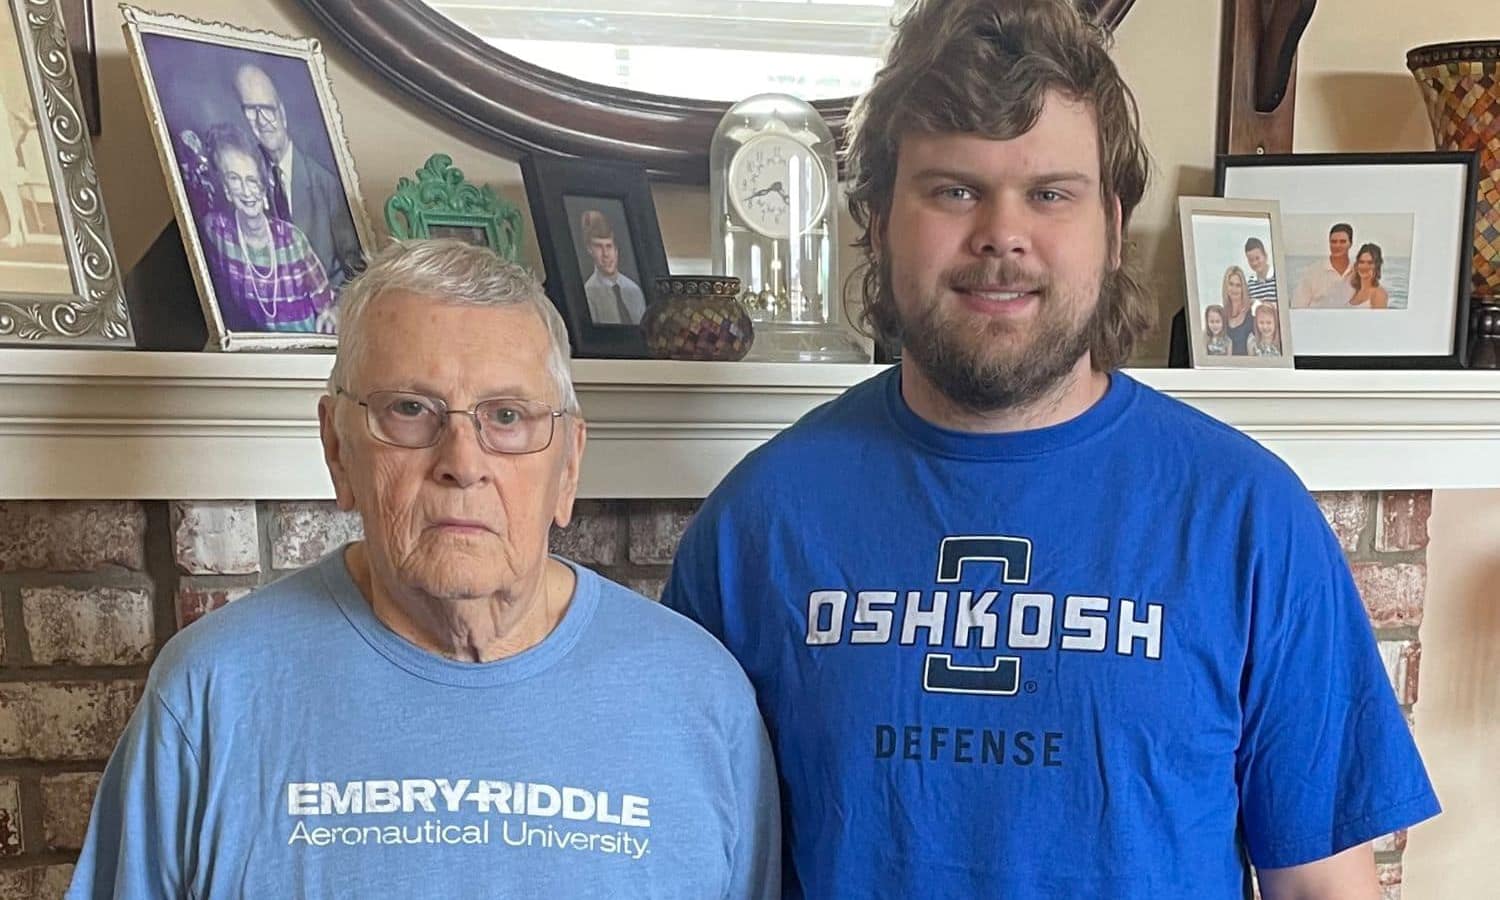 Although separated by 60 years, Bob Slaughter and his grandson Brady are proud of being Eagle grads. (Photo: Brady Slaughter)